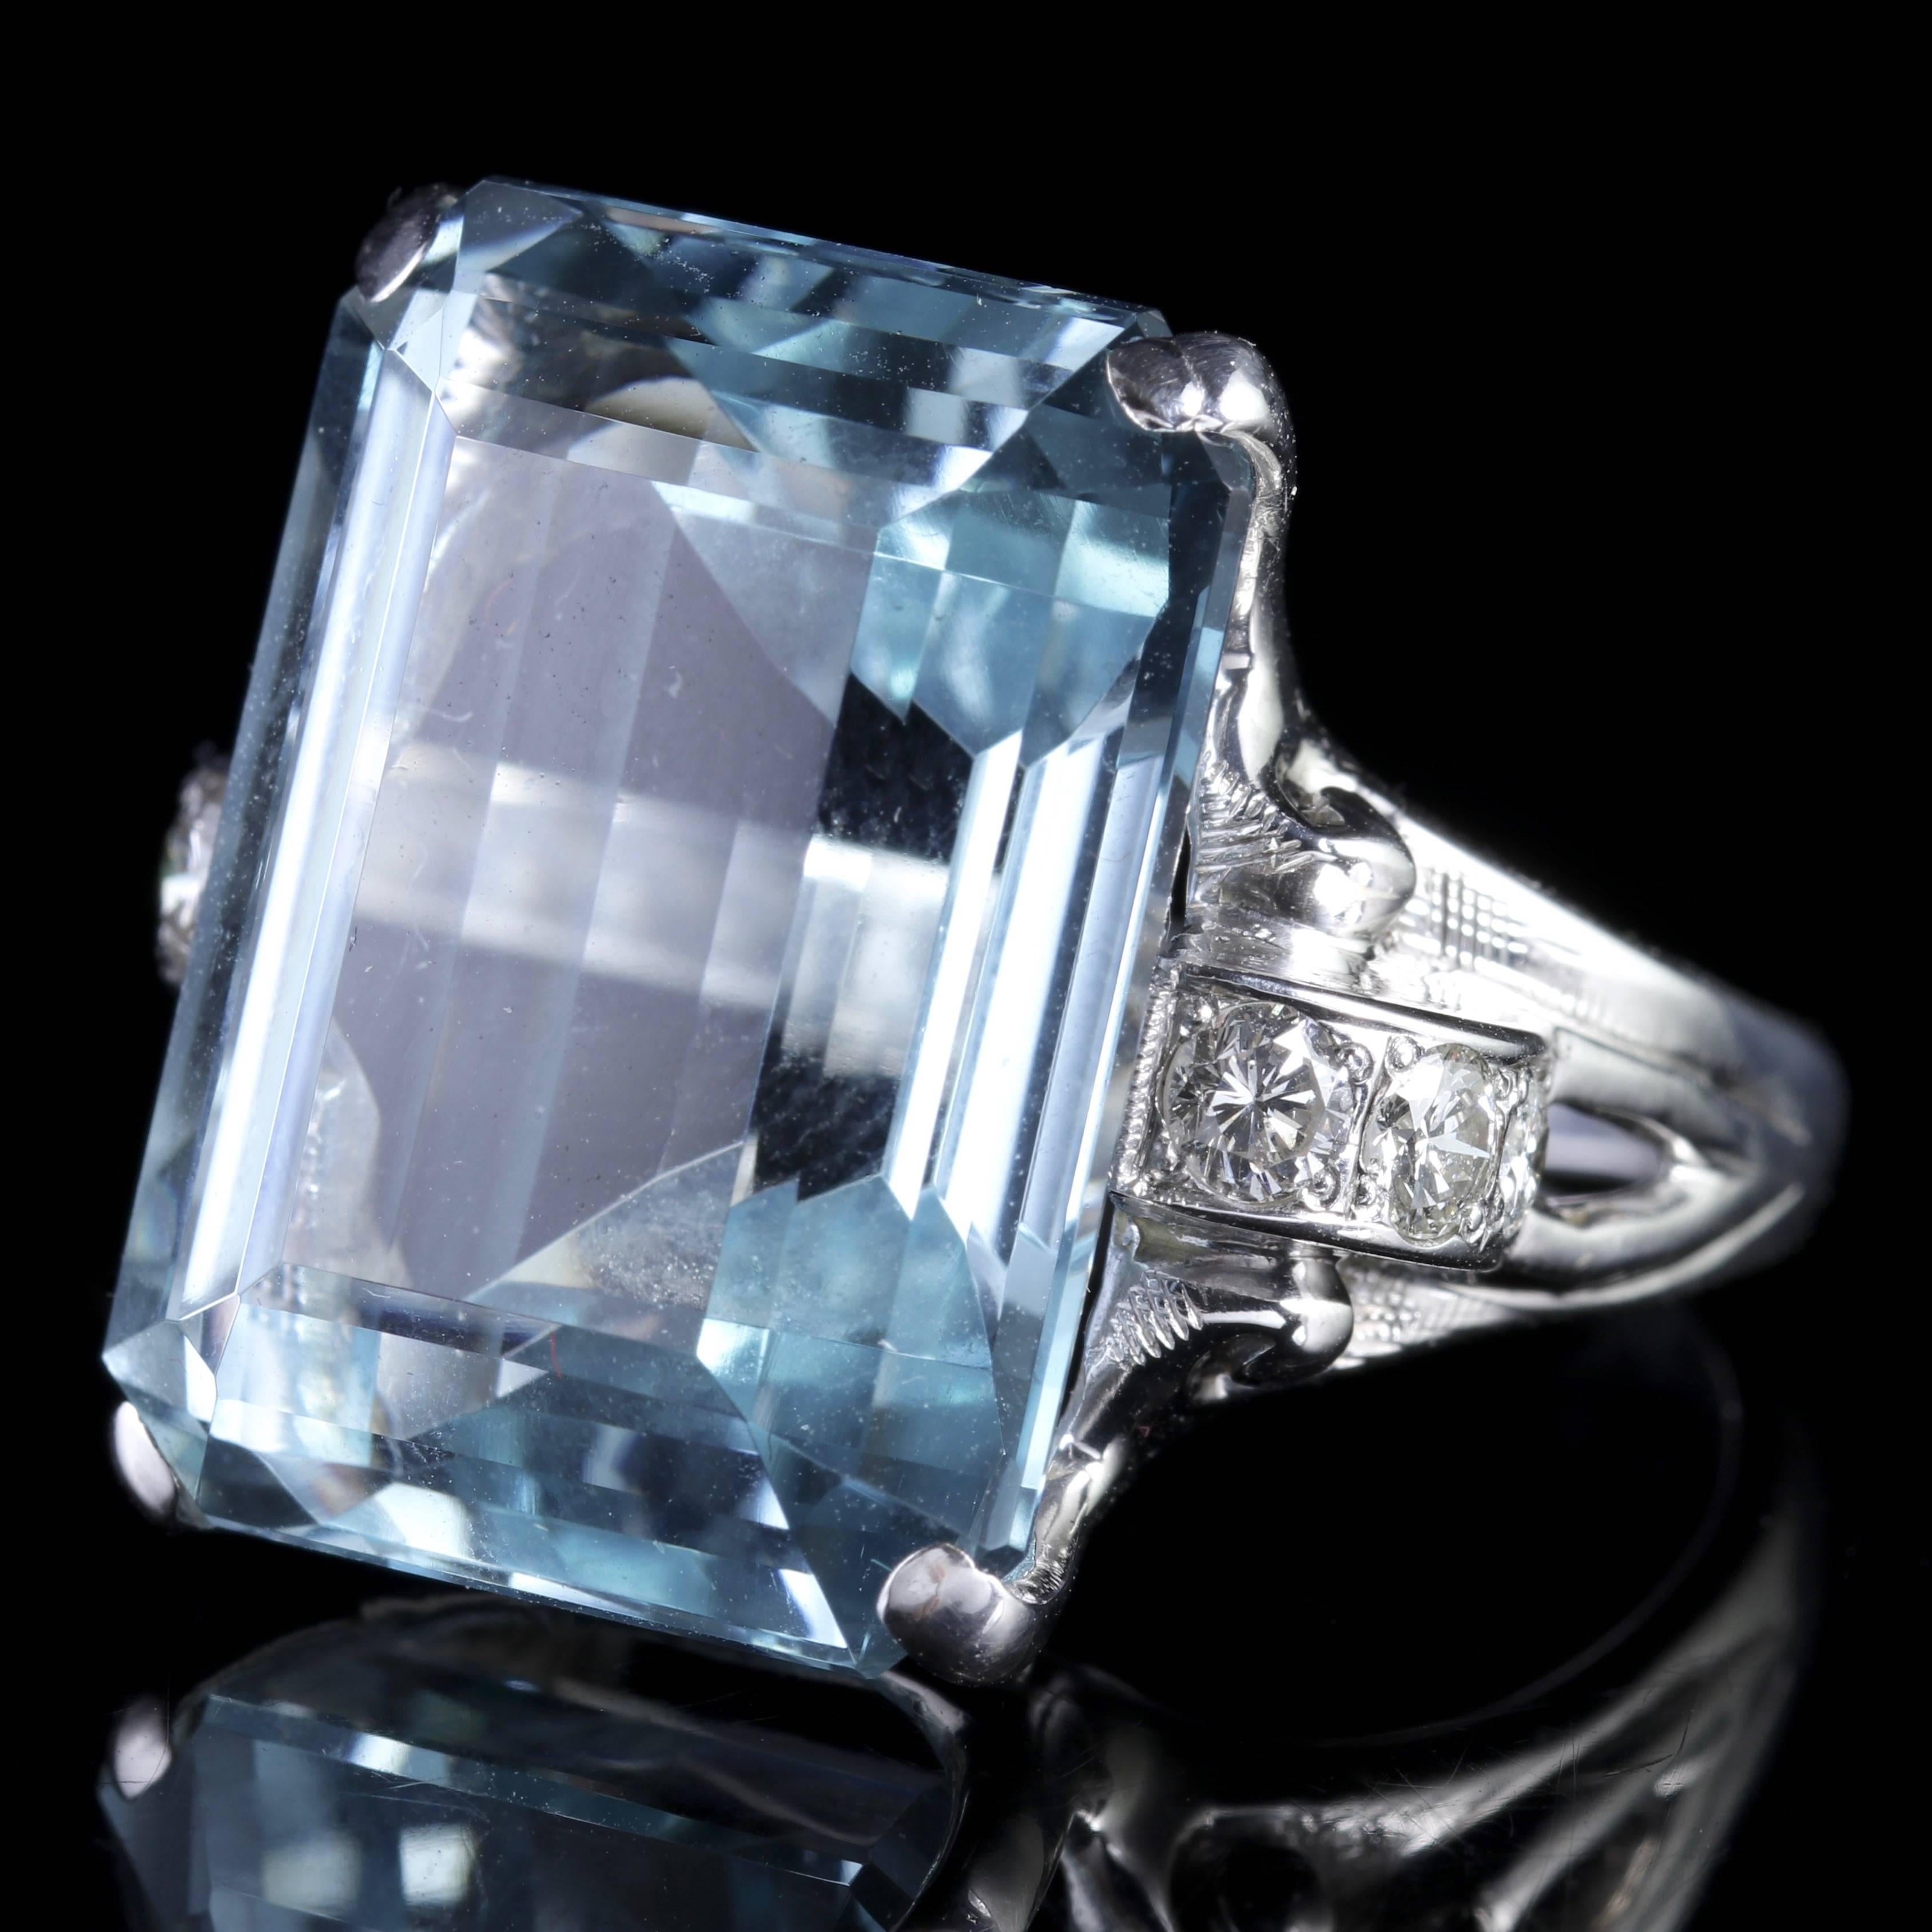 To read more please click continue reading below-

This fabulous antique Art Deco Aquamarine and Diamond ring is set in 14ct White Gold.

Art Deco, named after the 1925 Paris Exposition des Arts Decoratifs et Industriels Modernes, represents the